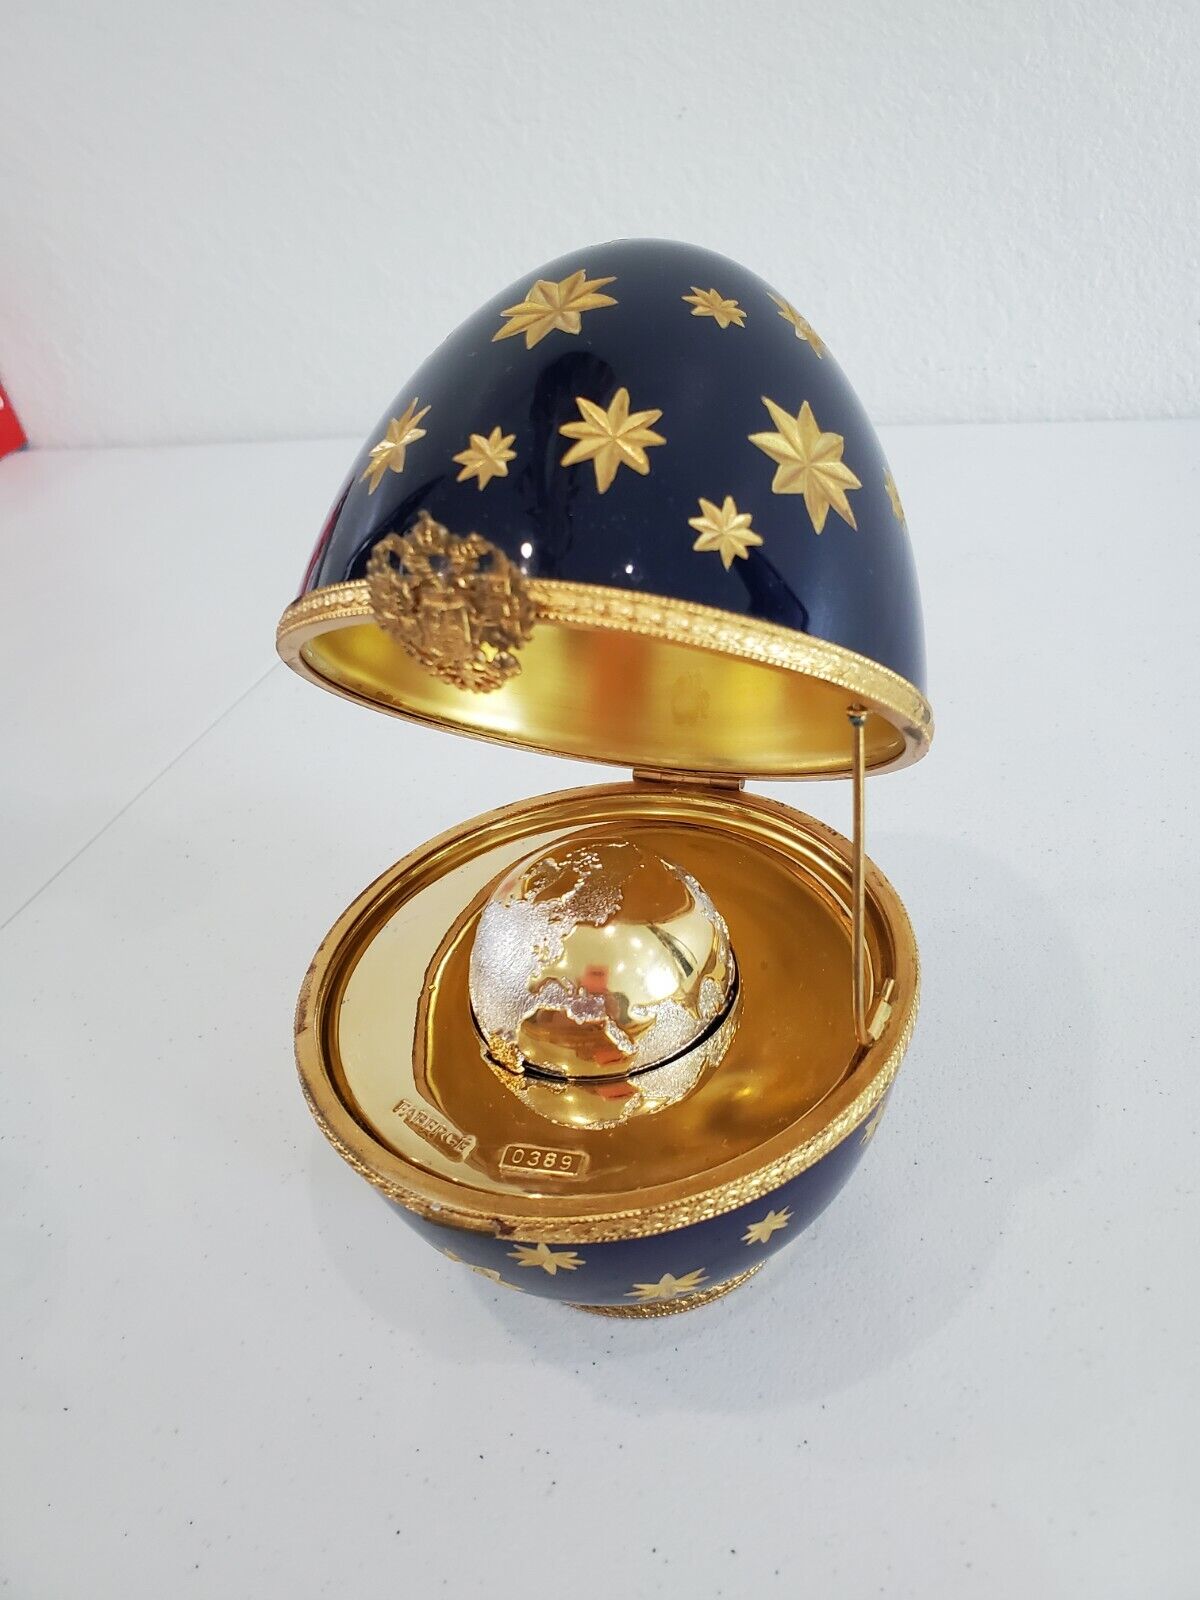  FABERGE LIMITED EDITION Navy Blue Gold Starburst EGG w/ Silver Gold Globe 6\